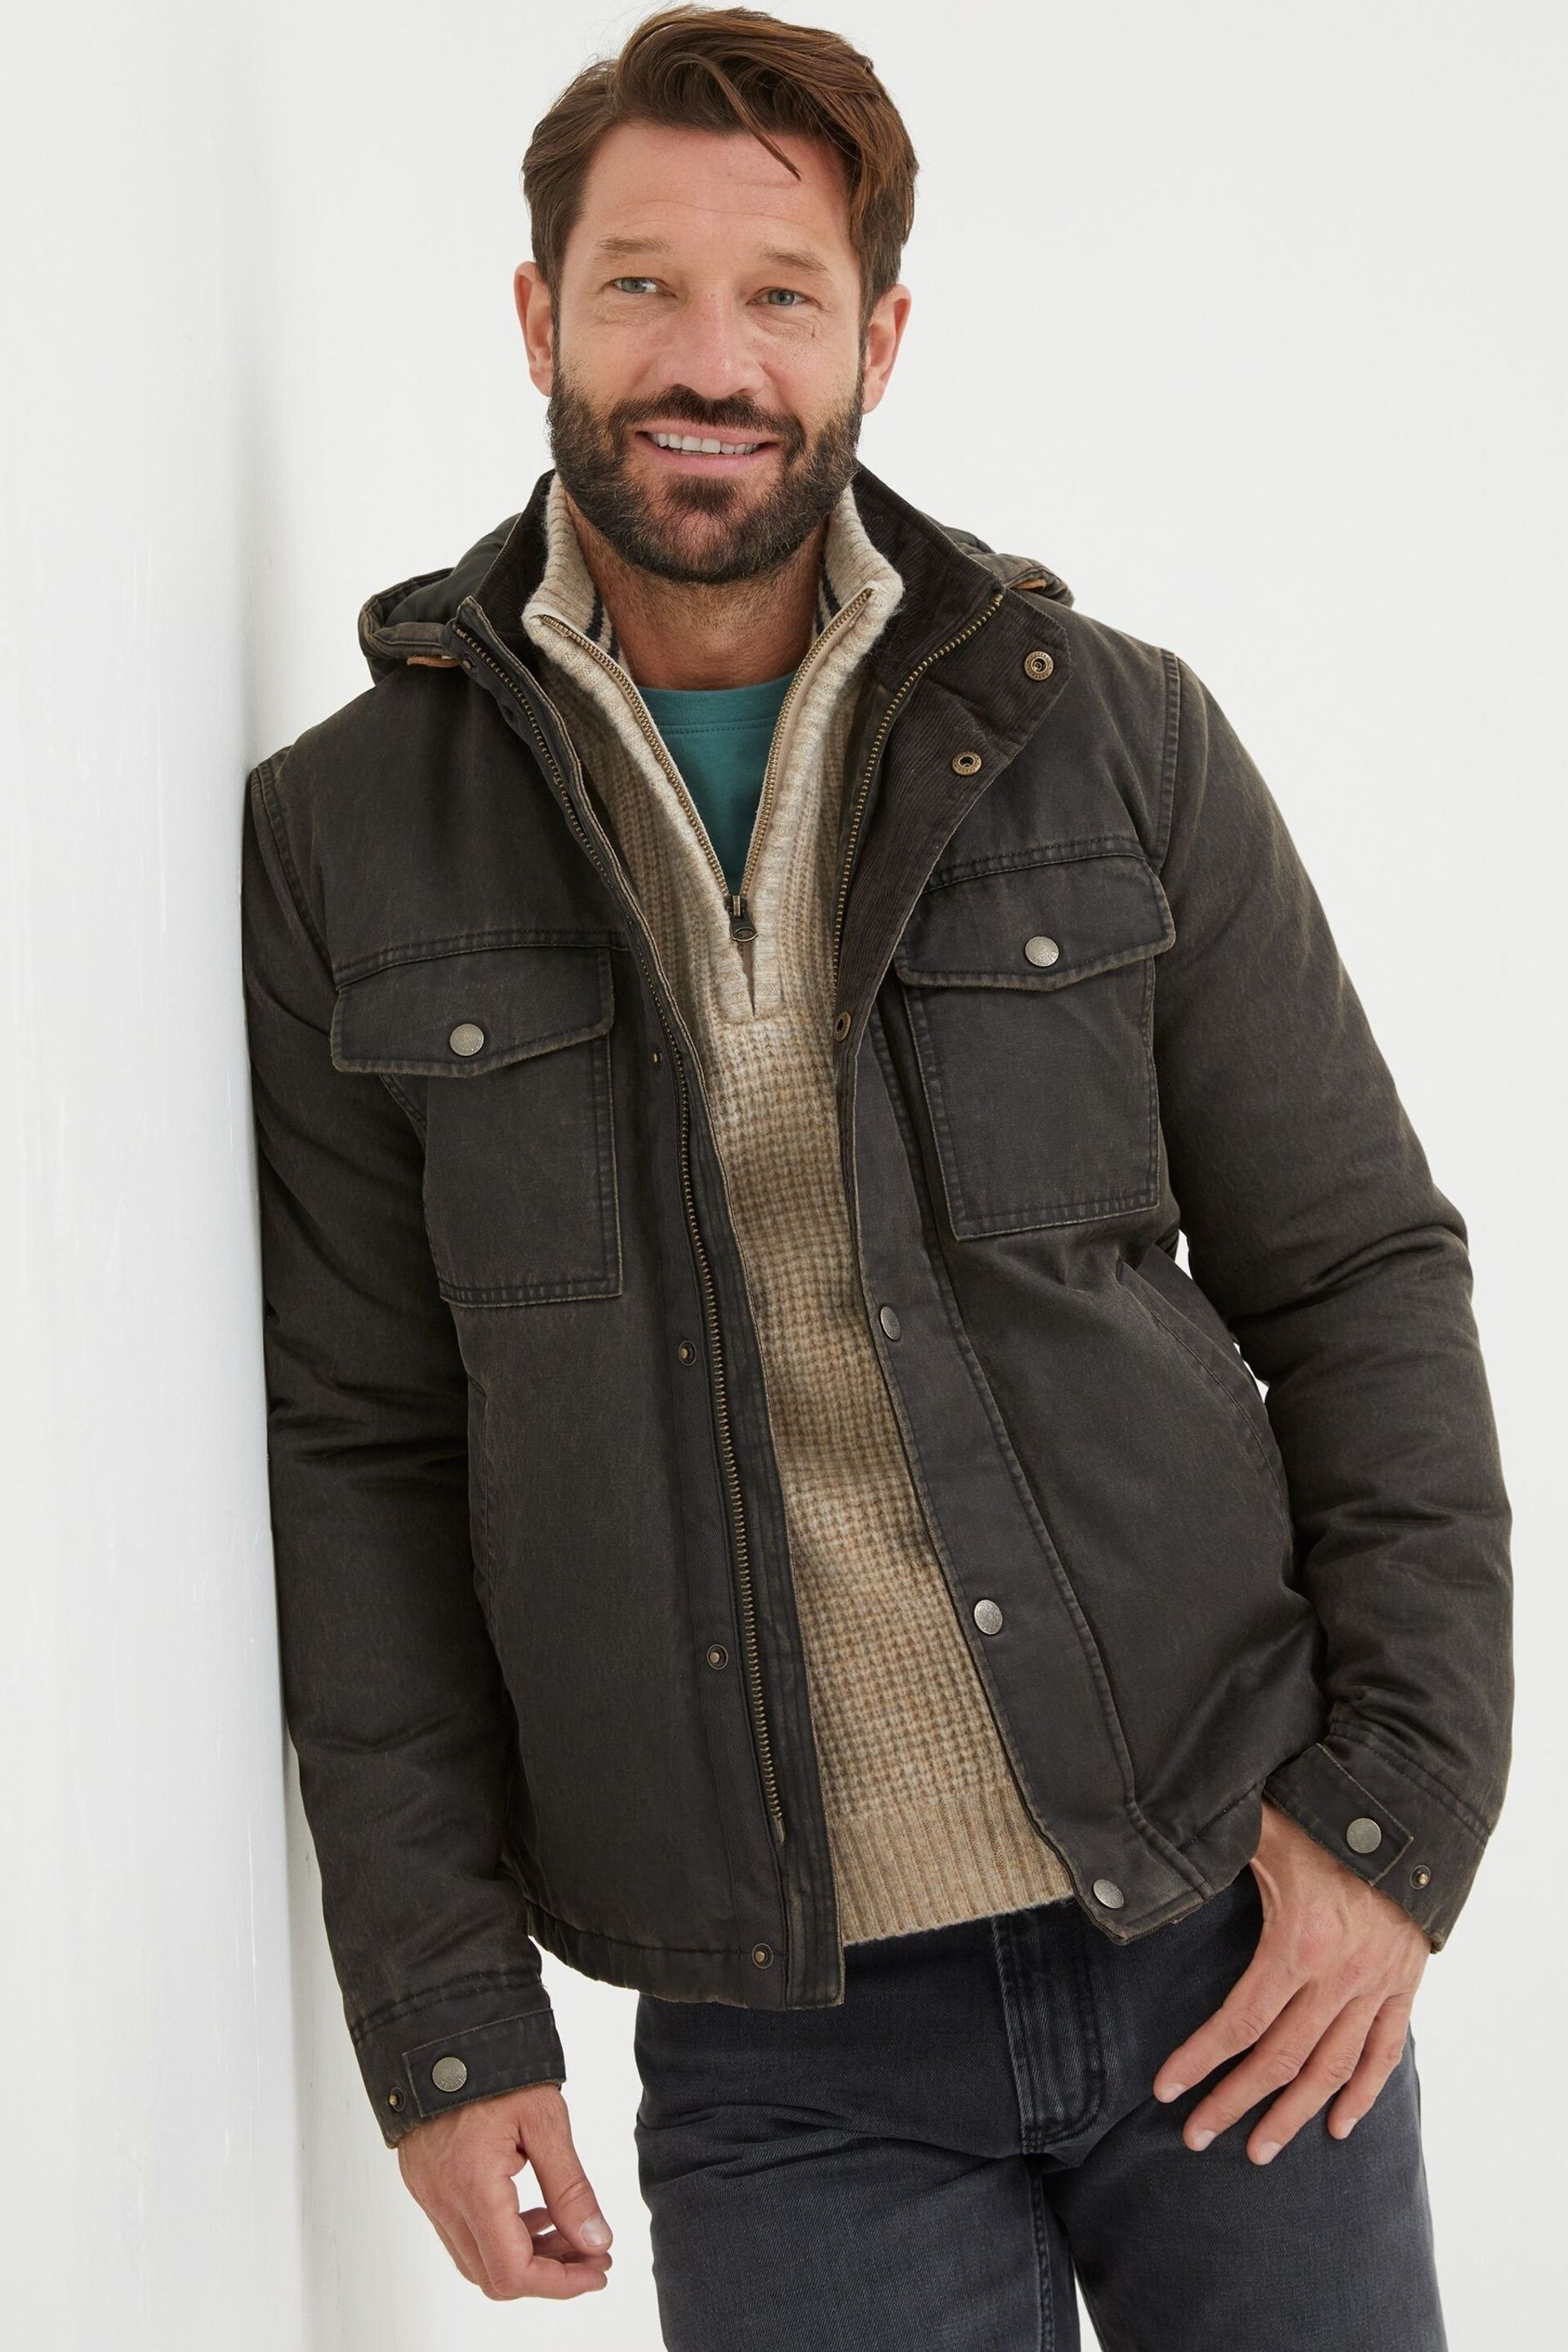 FatFace Brown Hooded Jacket - Image 1 of 6